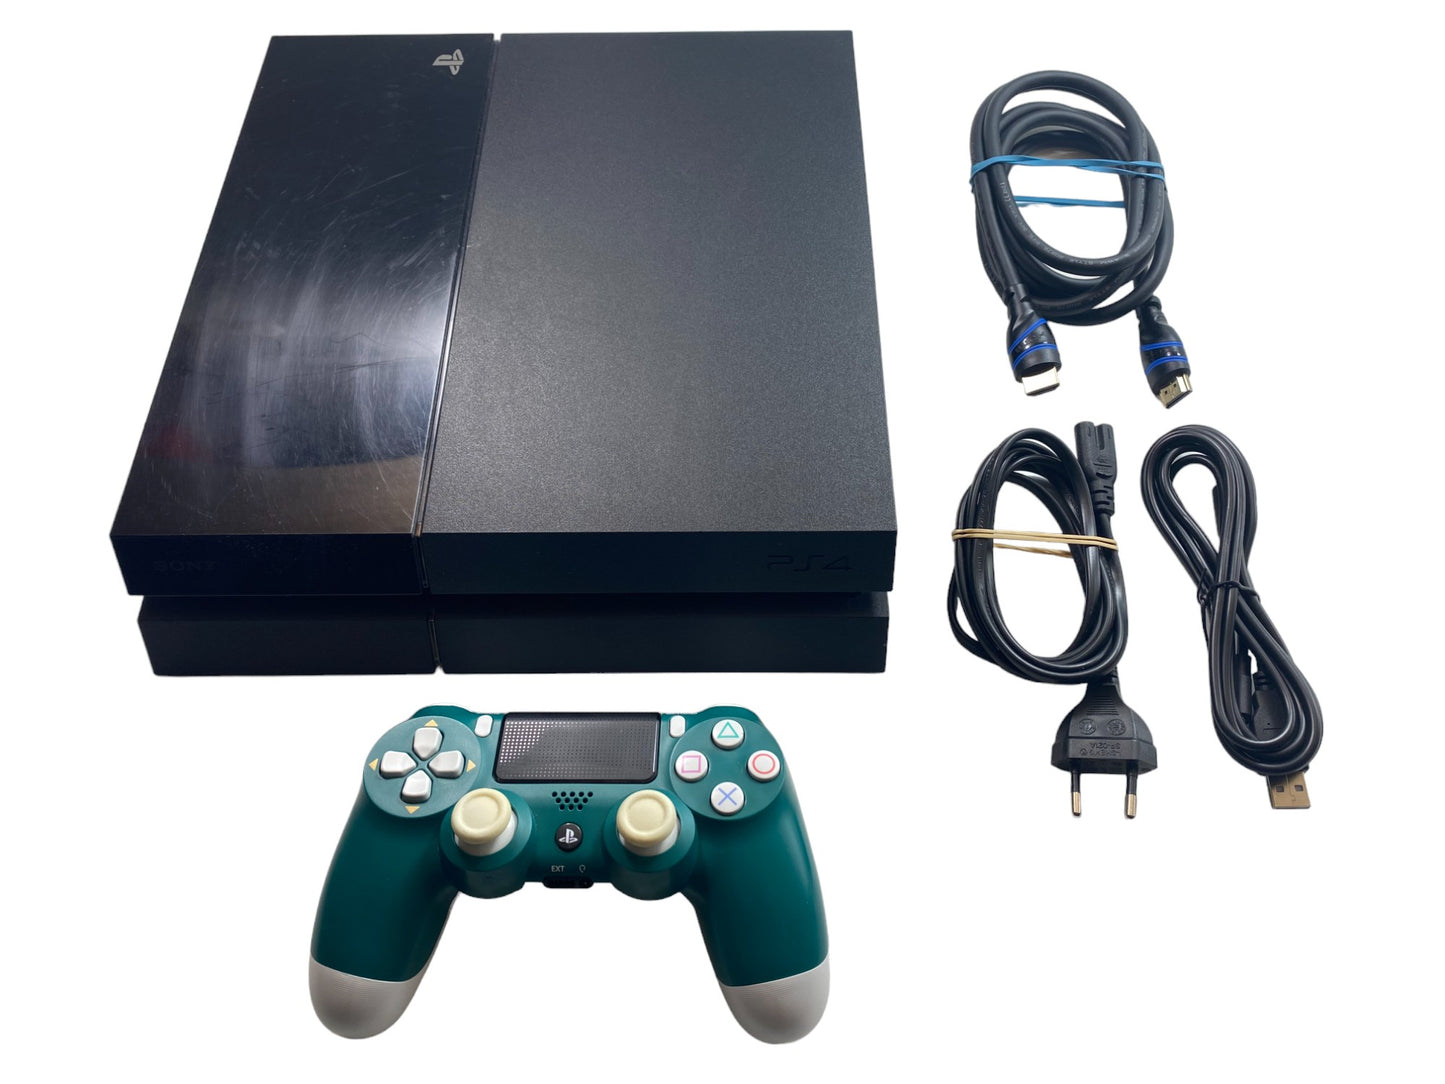 Sony Playstation 4 / PS4 Konsole 500GB + 1 Controller + Kabel